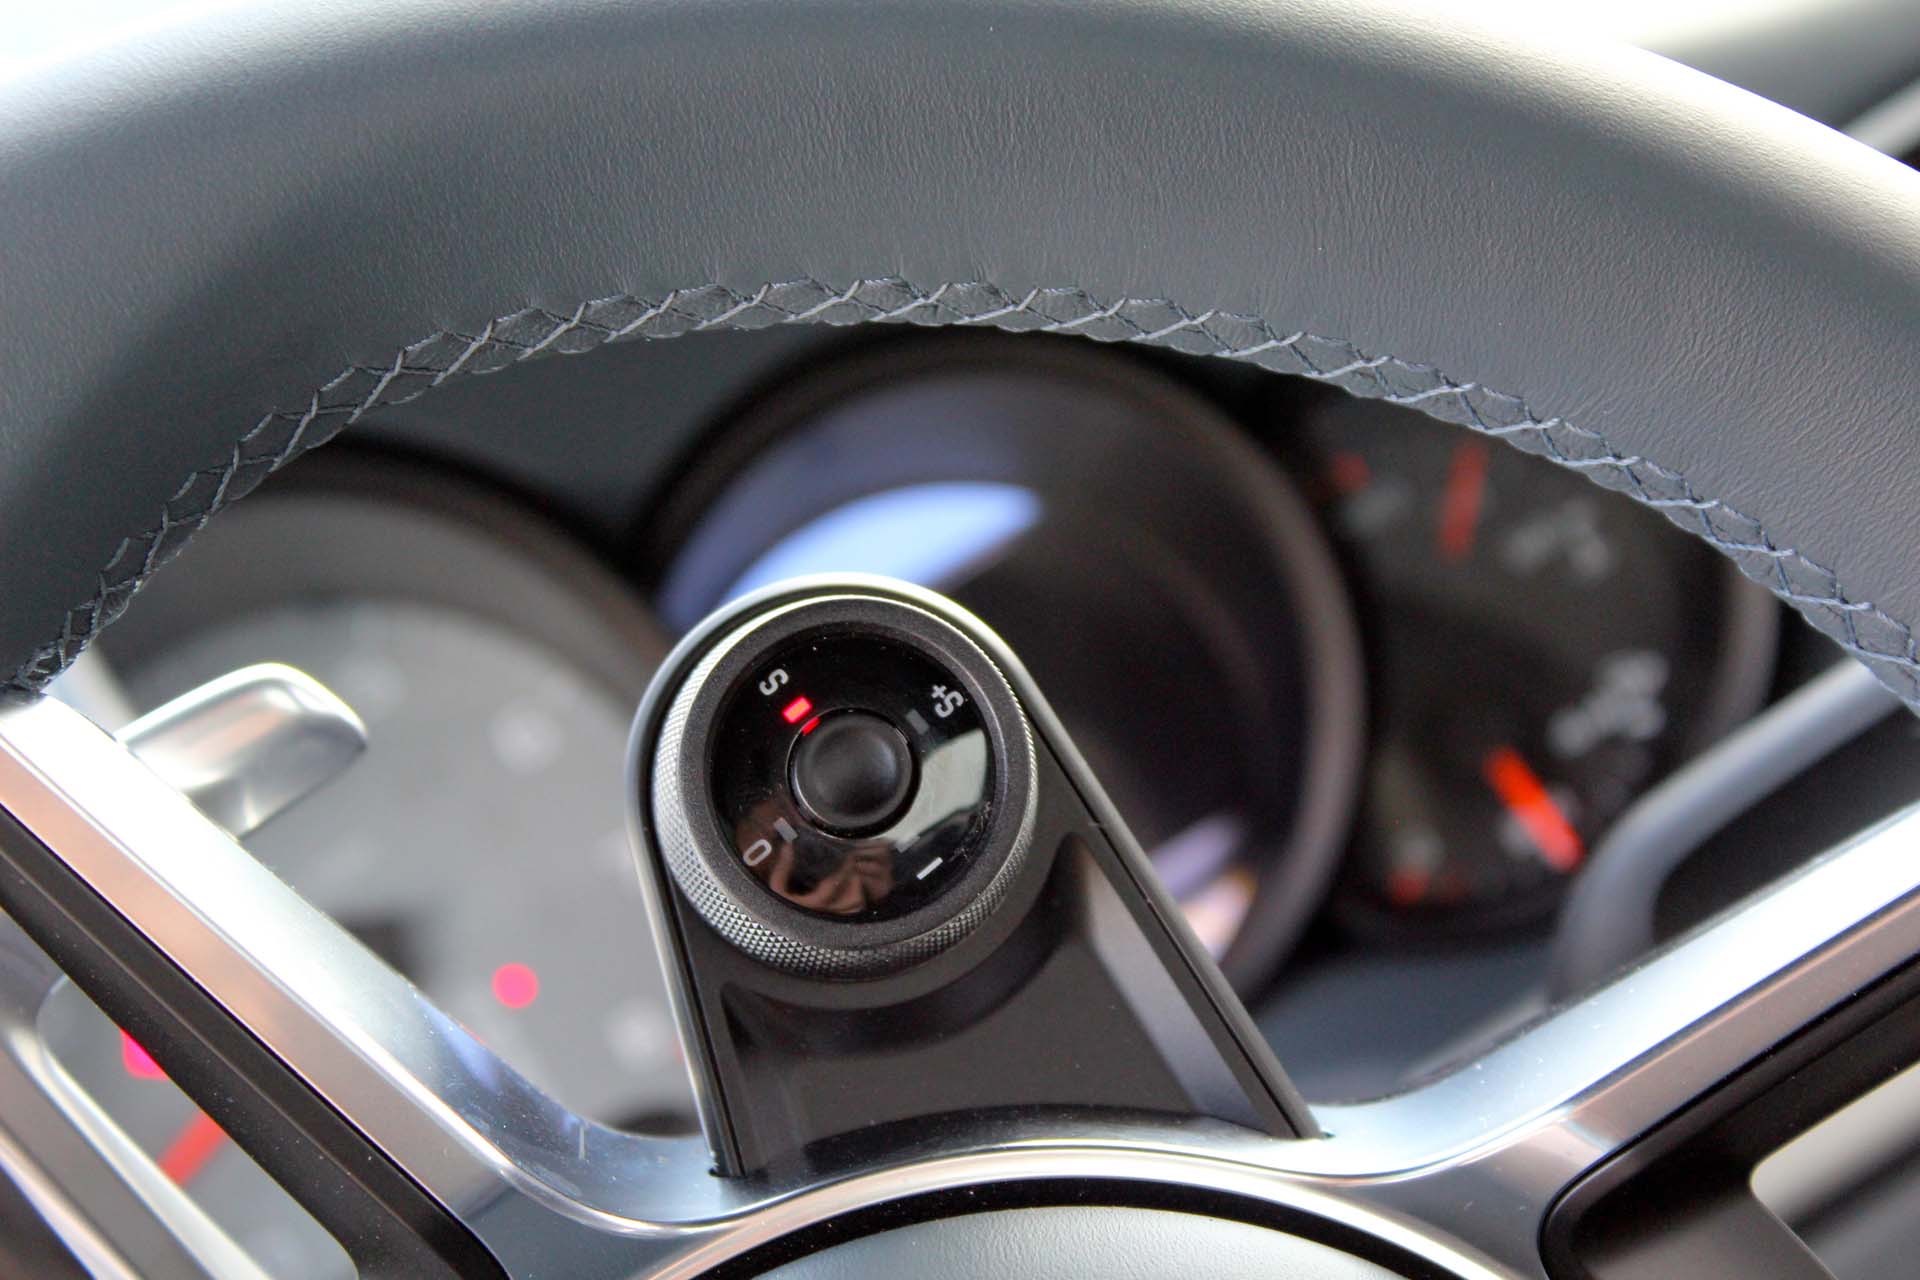 A new rotary switch on the steering wheel gives easy access to drive modes – Normal, Sport, Sport Plus and Individual. Press the button in the centre and you get 20 seconds of full attack mode.